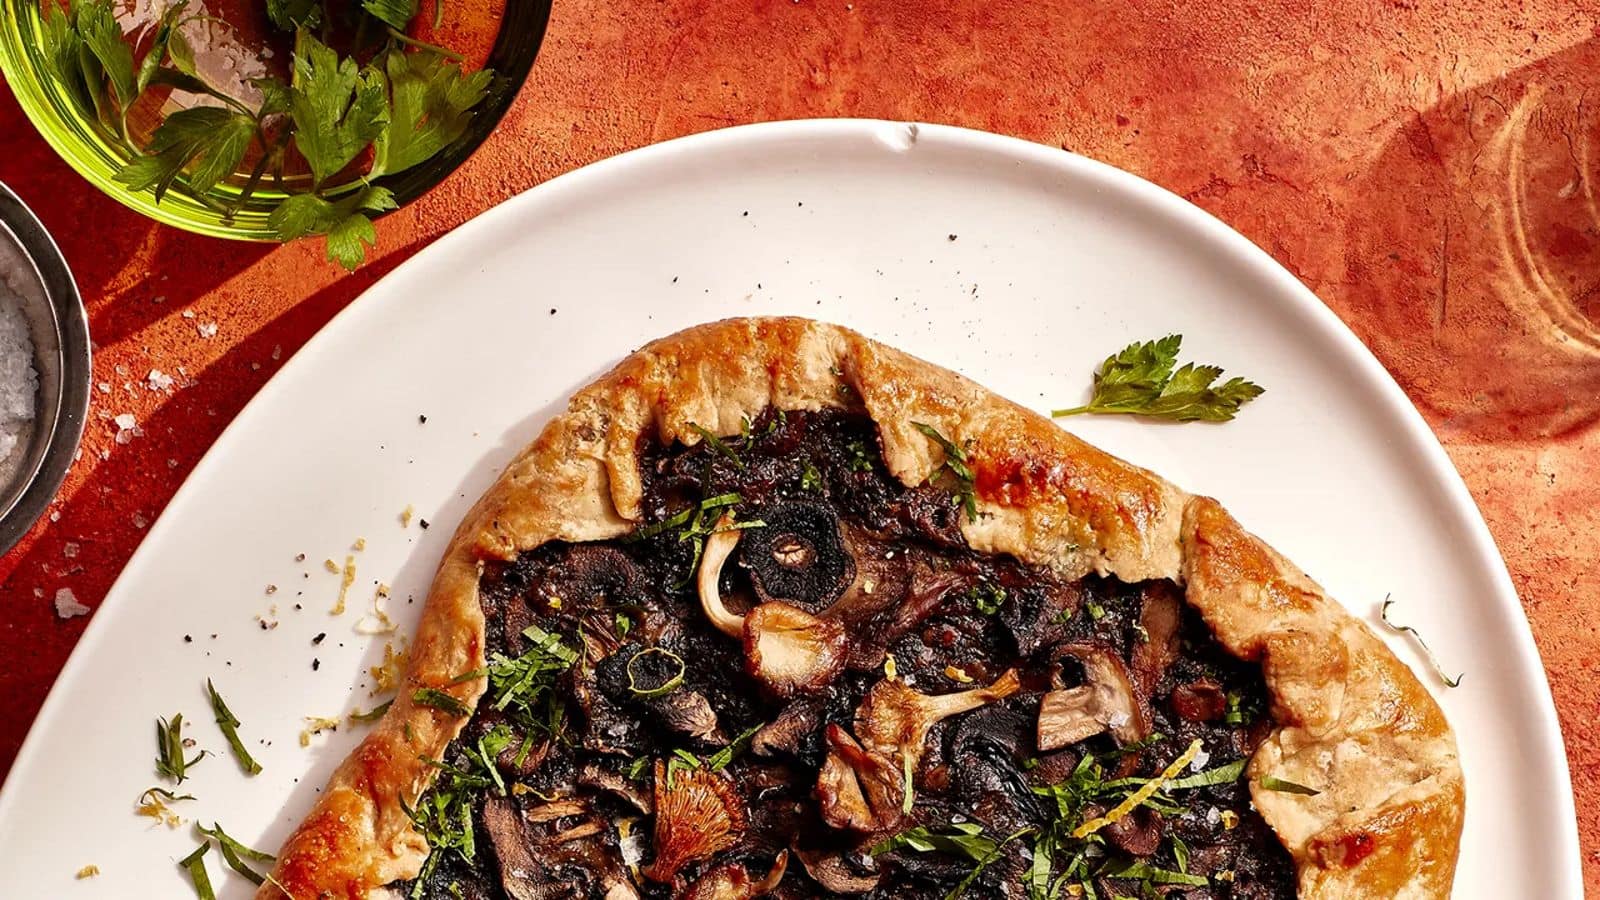 Guests coming over? Make this rustic roasted vegetable tart